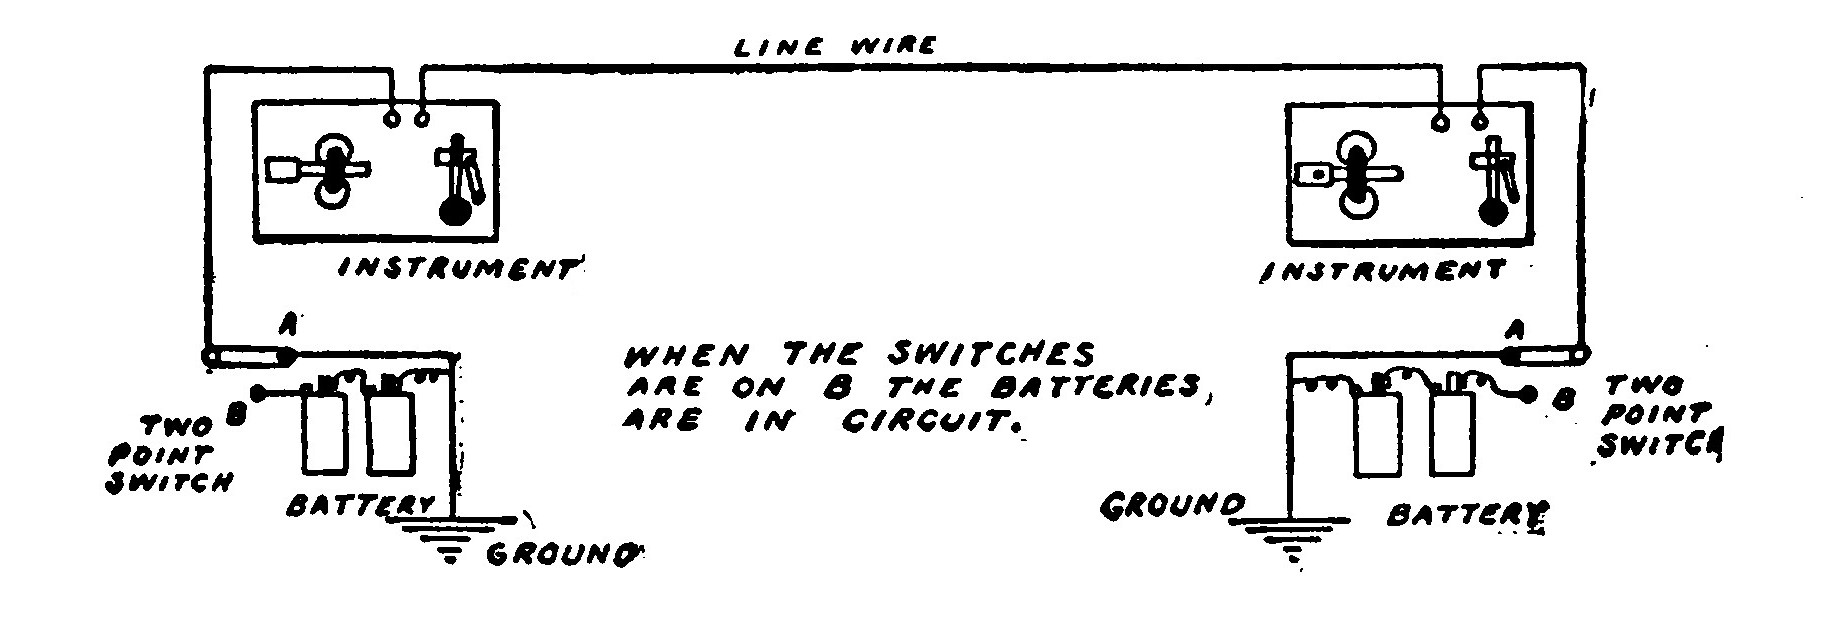 Fig. 137.—A Diagram showing how to connect two Complete Telegraph Sets, using one Line Wire and a Ground.